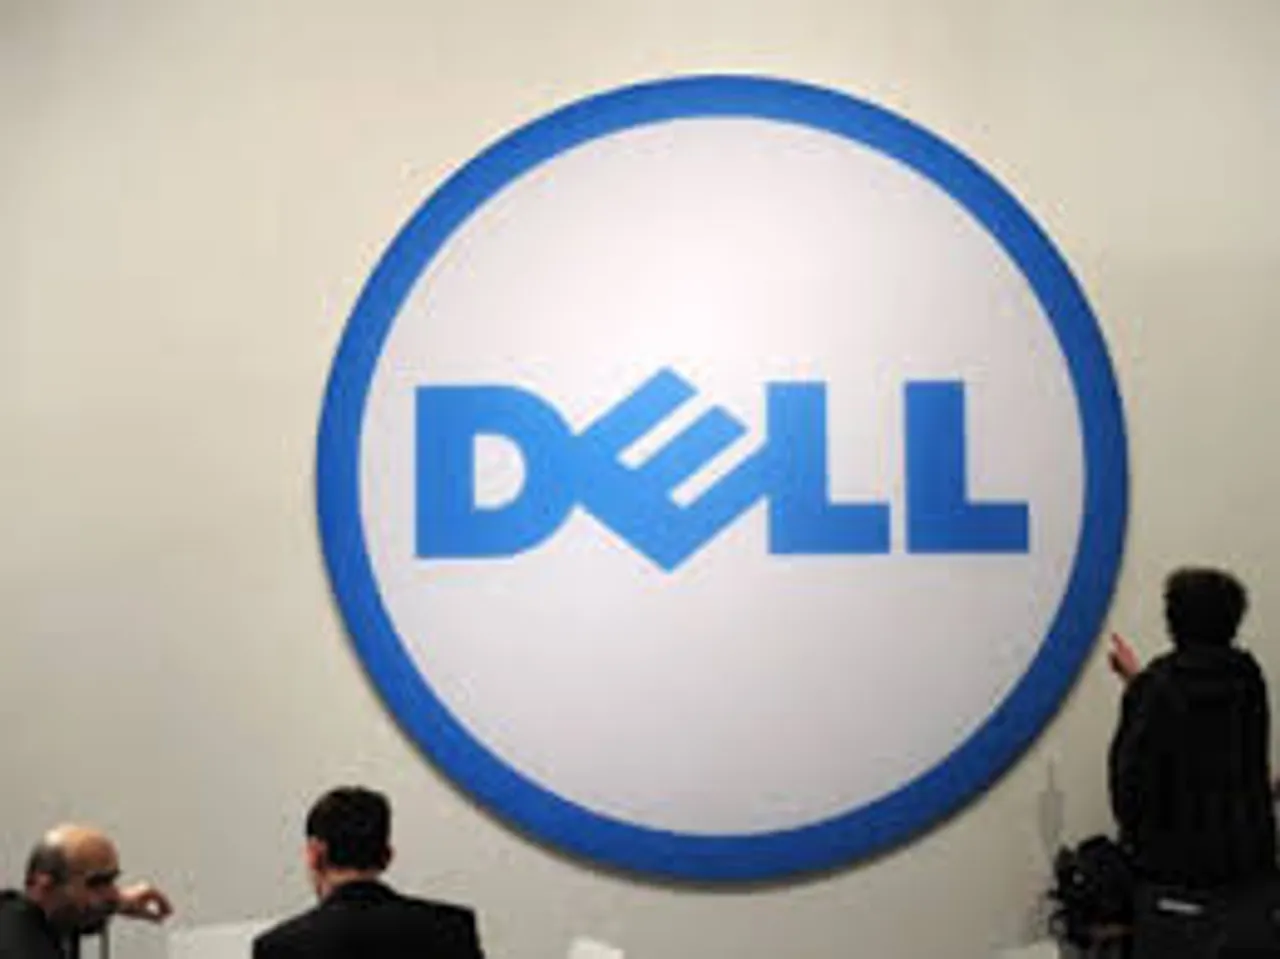 Interview with Ritu Gupta, Director, Marketing, Dell India on Their Social Media Strategy